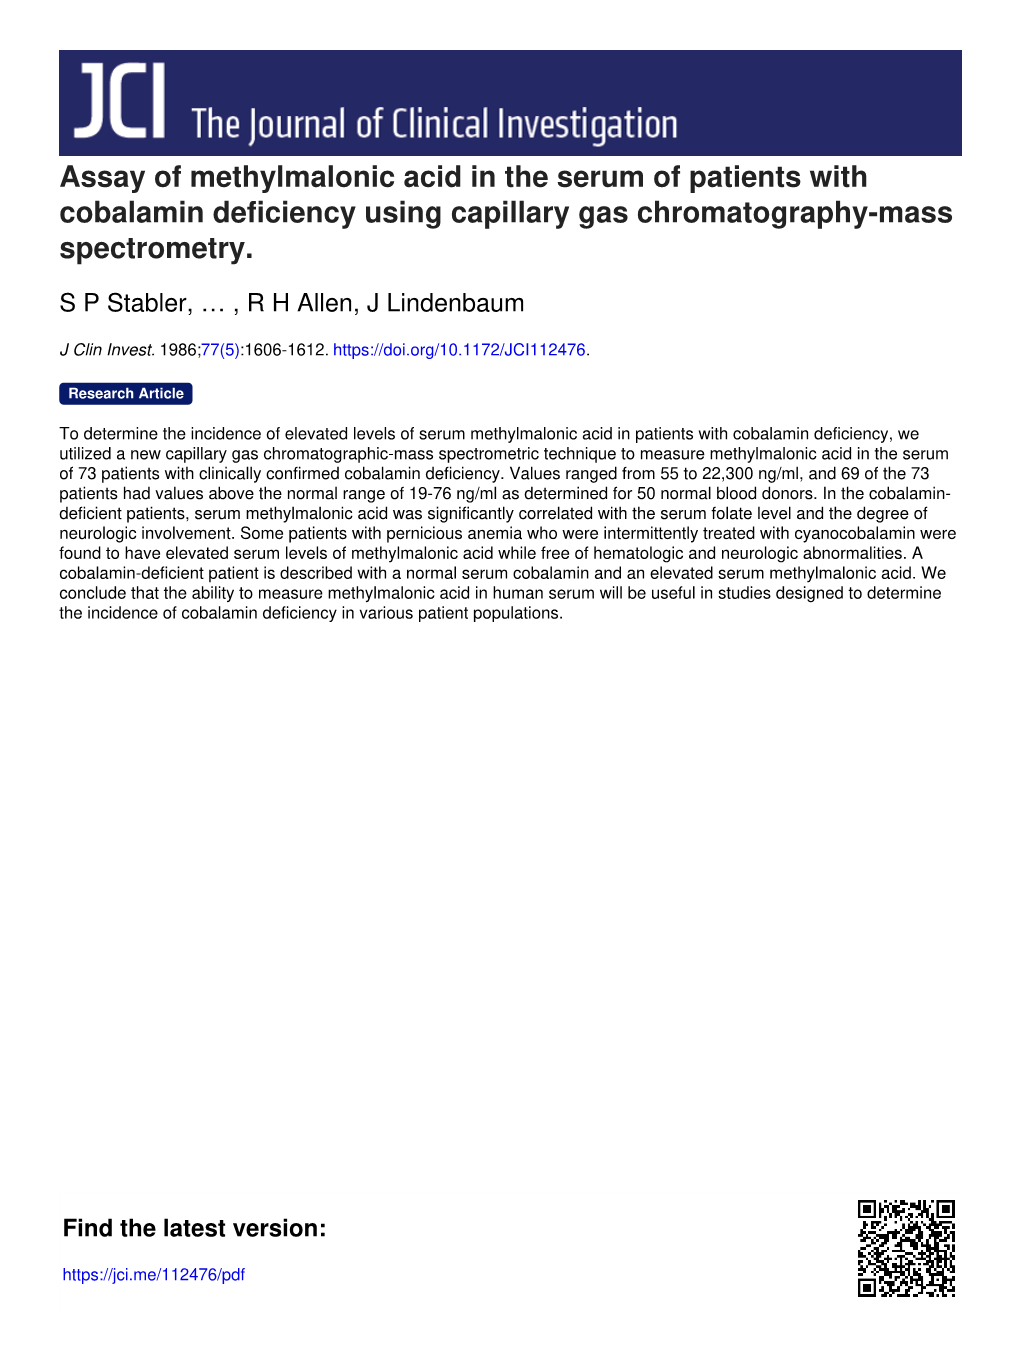 Assay of Methylmalonic Acid in the Serum of Patients with Cobalamin Deficiency Using Capillary Gas Chromatography-Mass Spectrometry